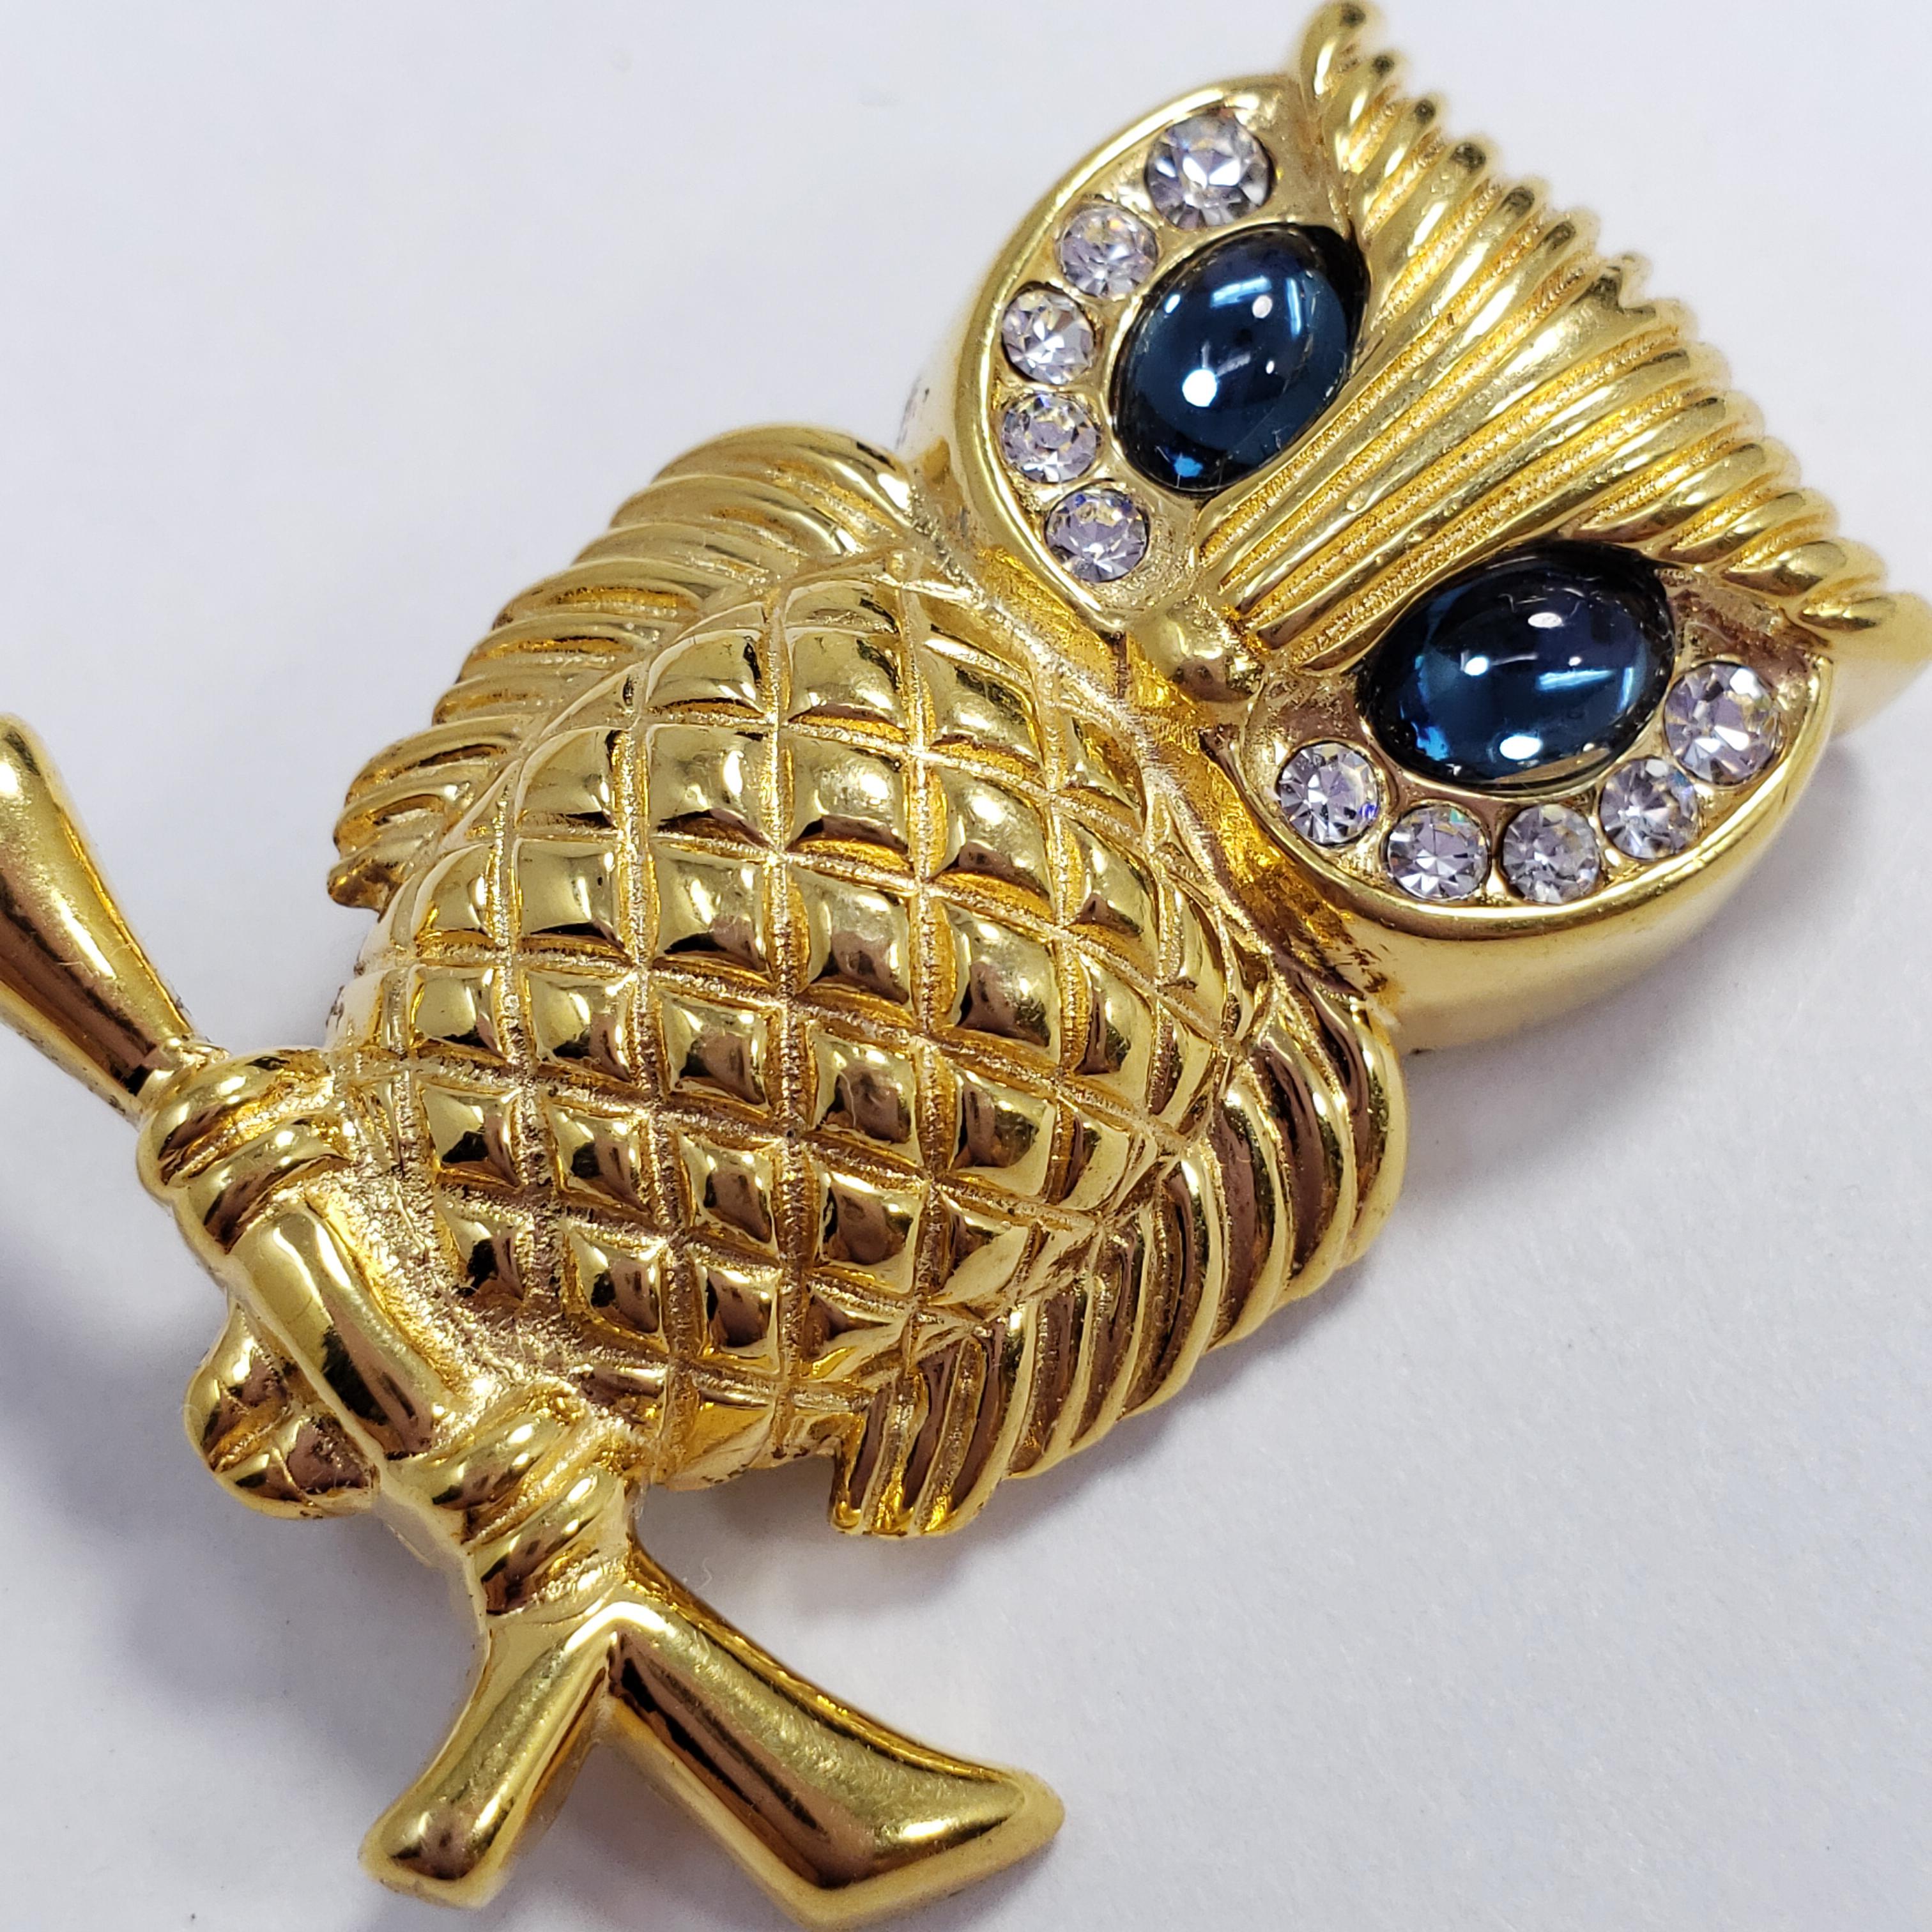 A vintage pin brooch by Krementz & Co. A gold-filled owl is perched atop a branch, its head accented with two opaque sapphire-colored cabochons and clear crystals.

Hallmarks: Krementz (on pin stem)